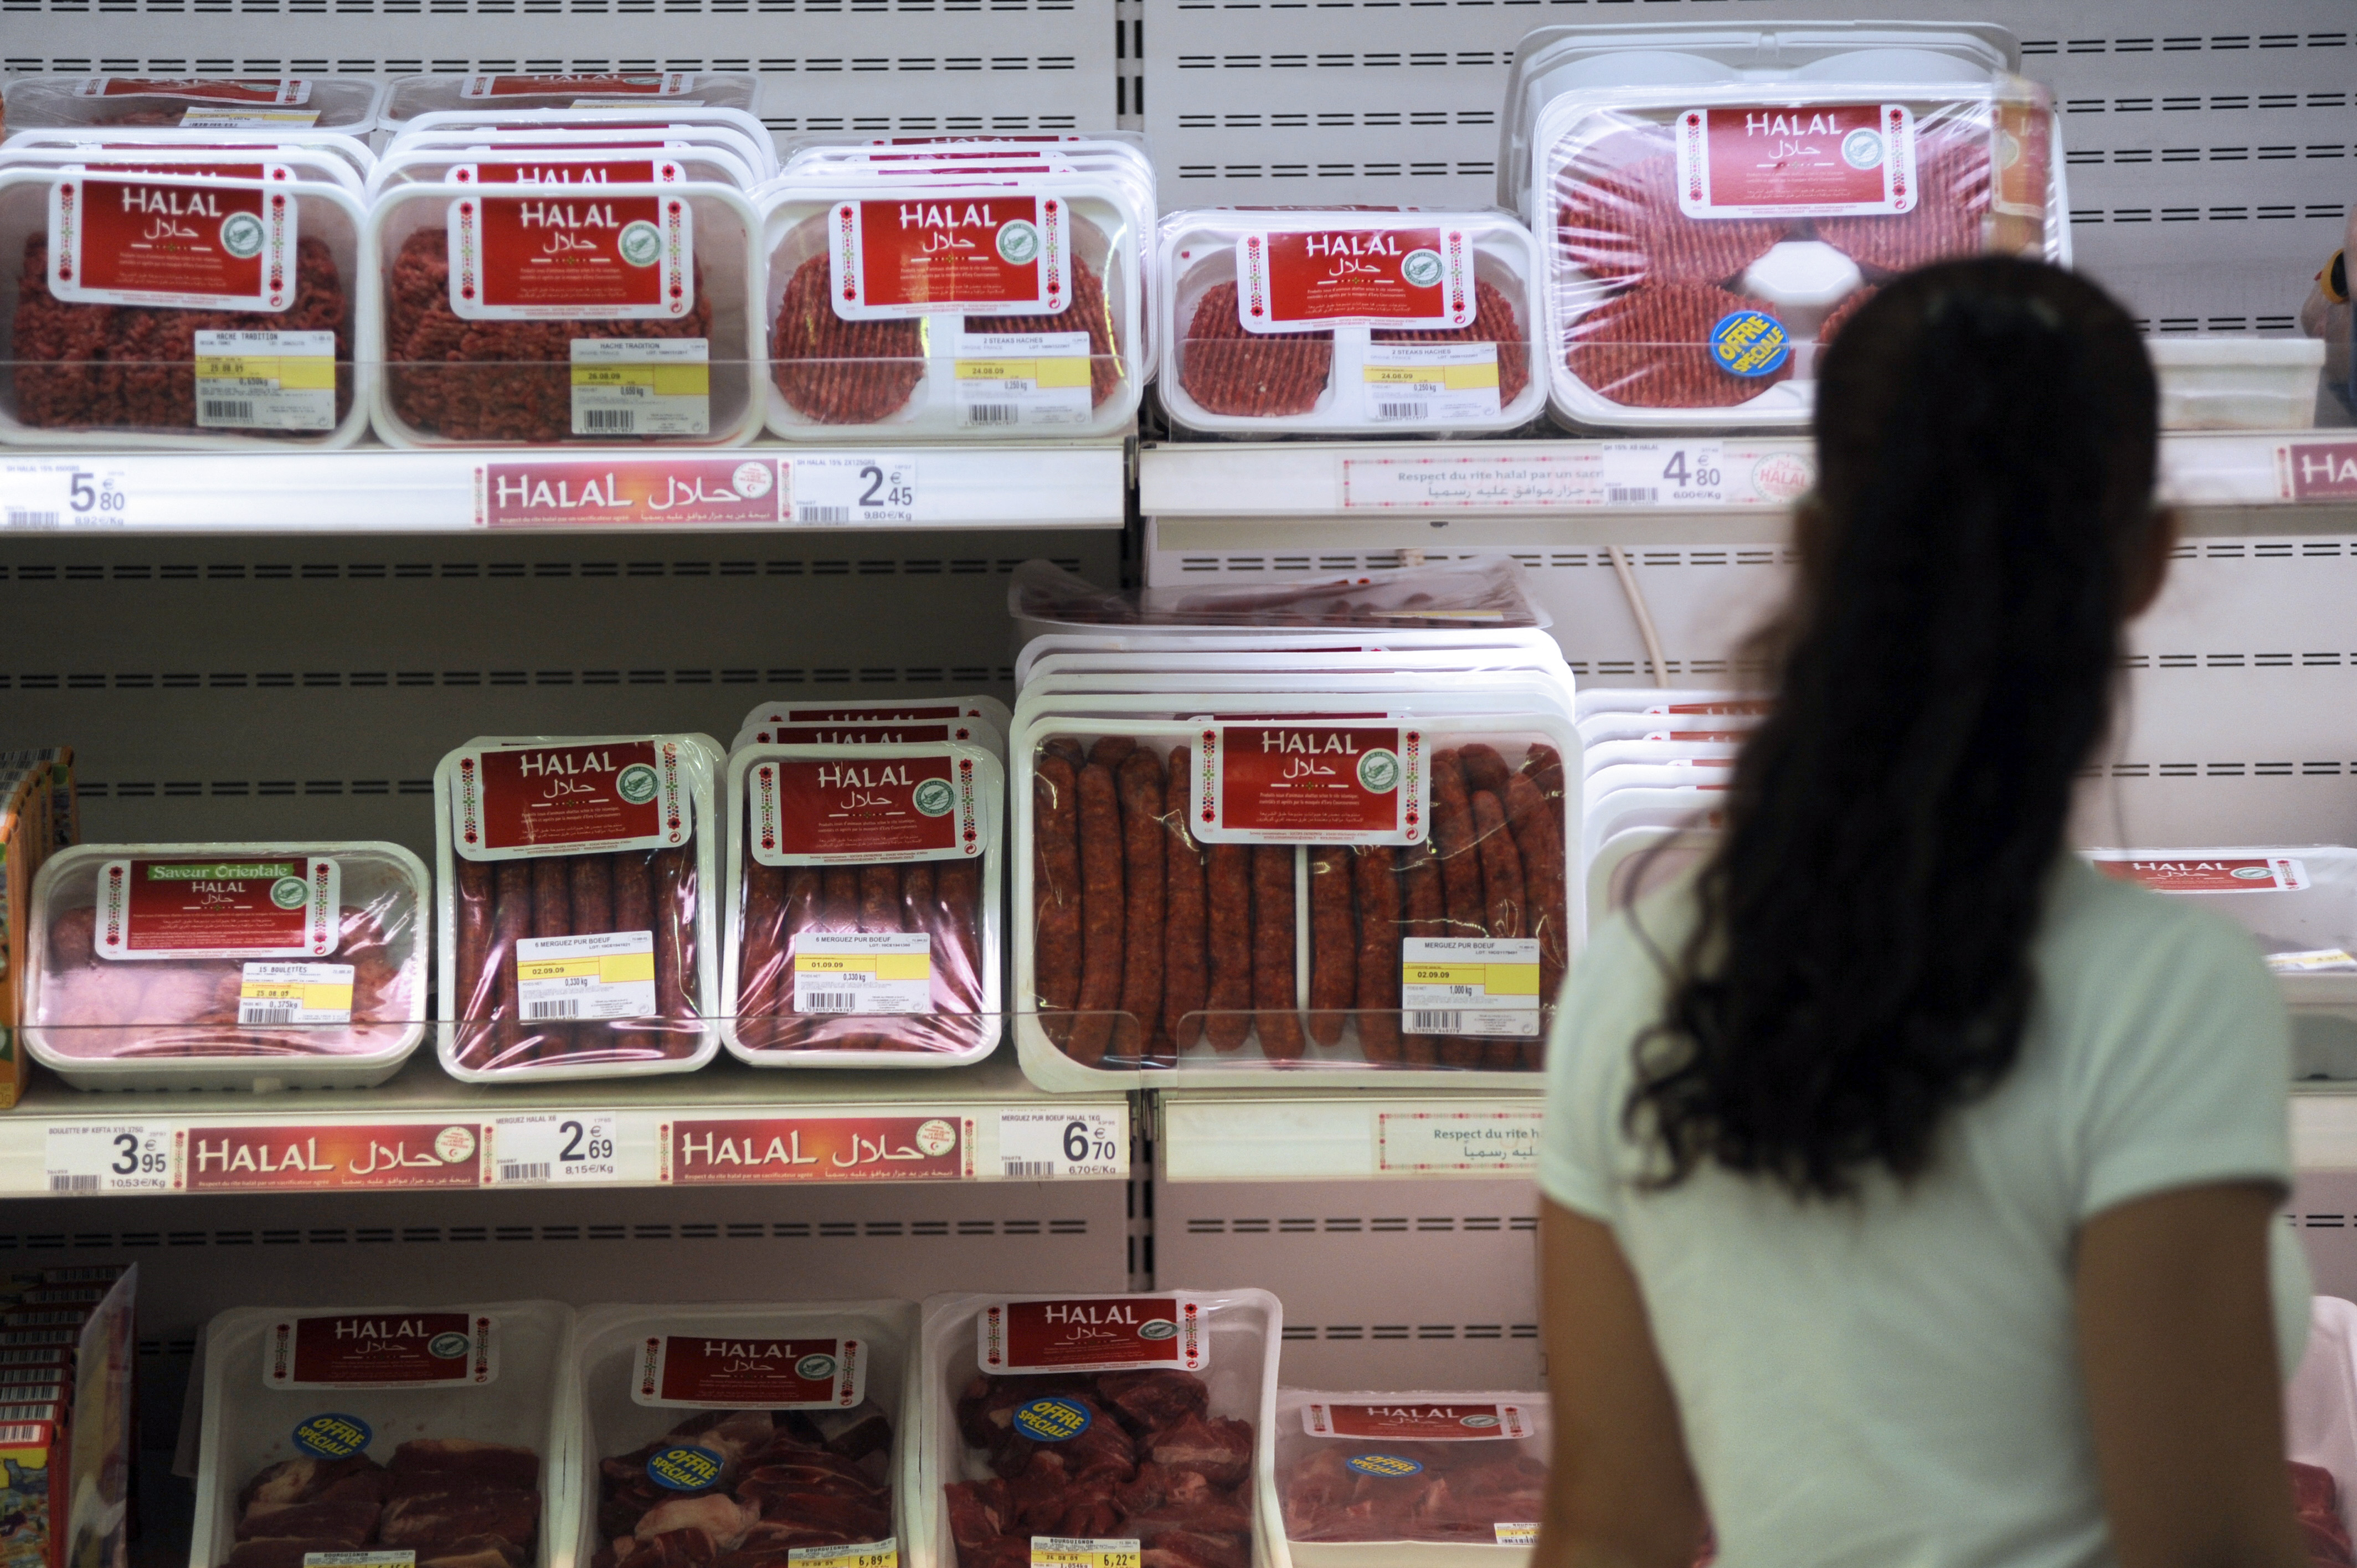 A customer passes by Halal butchery shelves in a supermarket in Illzach, eastern France, on Aug. 21, 2009. (Sebastien Bozon—AFP/Getty Images)